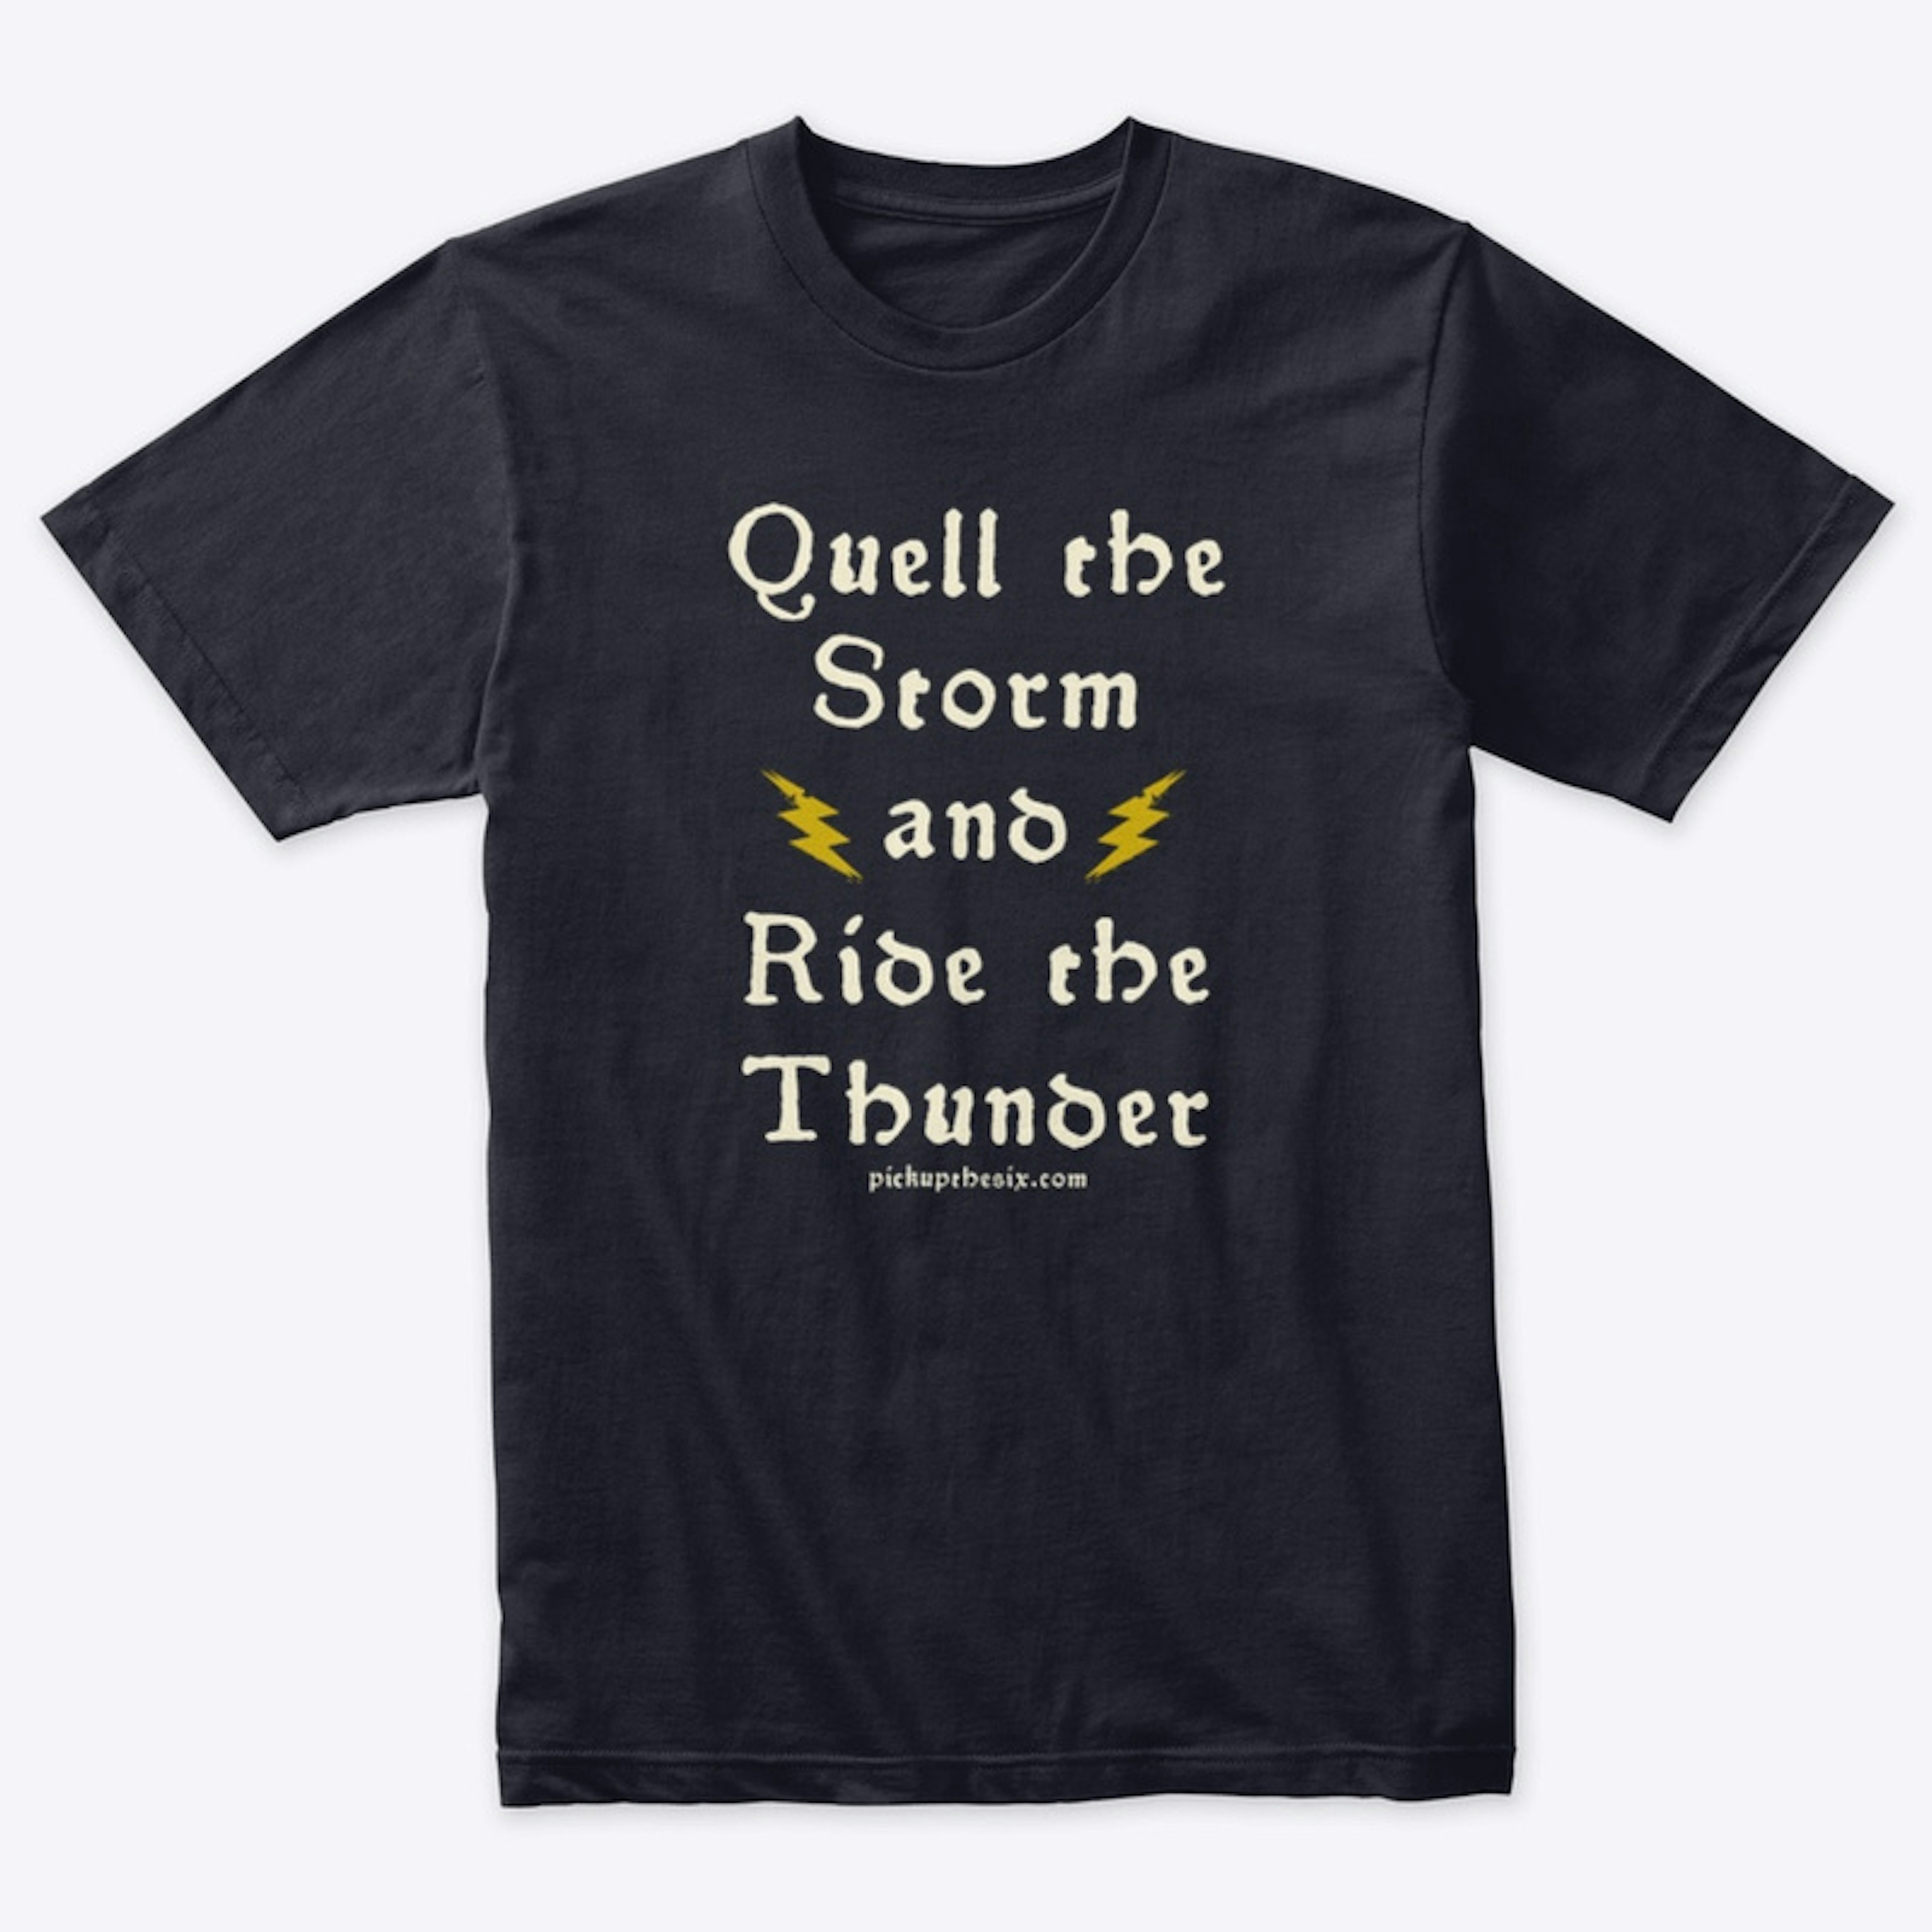 Quell the Storm and Ride the Thunder